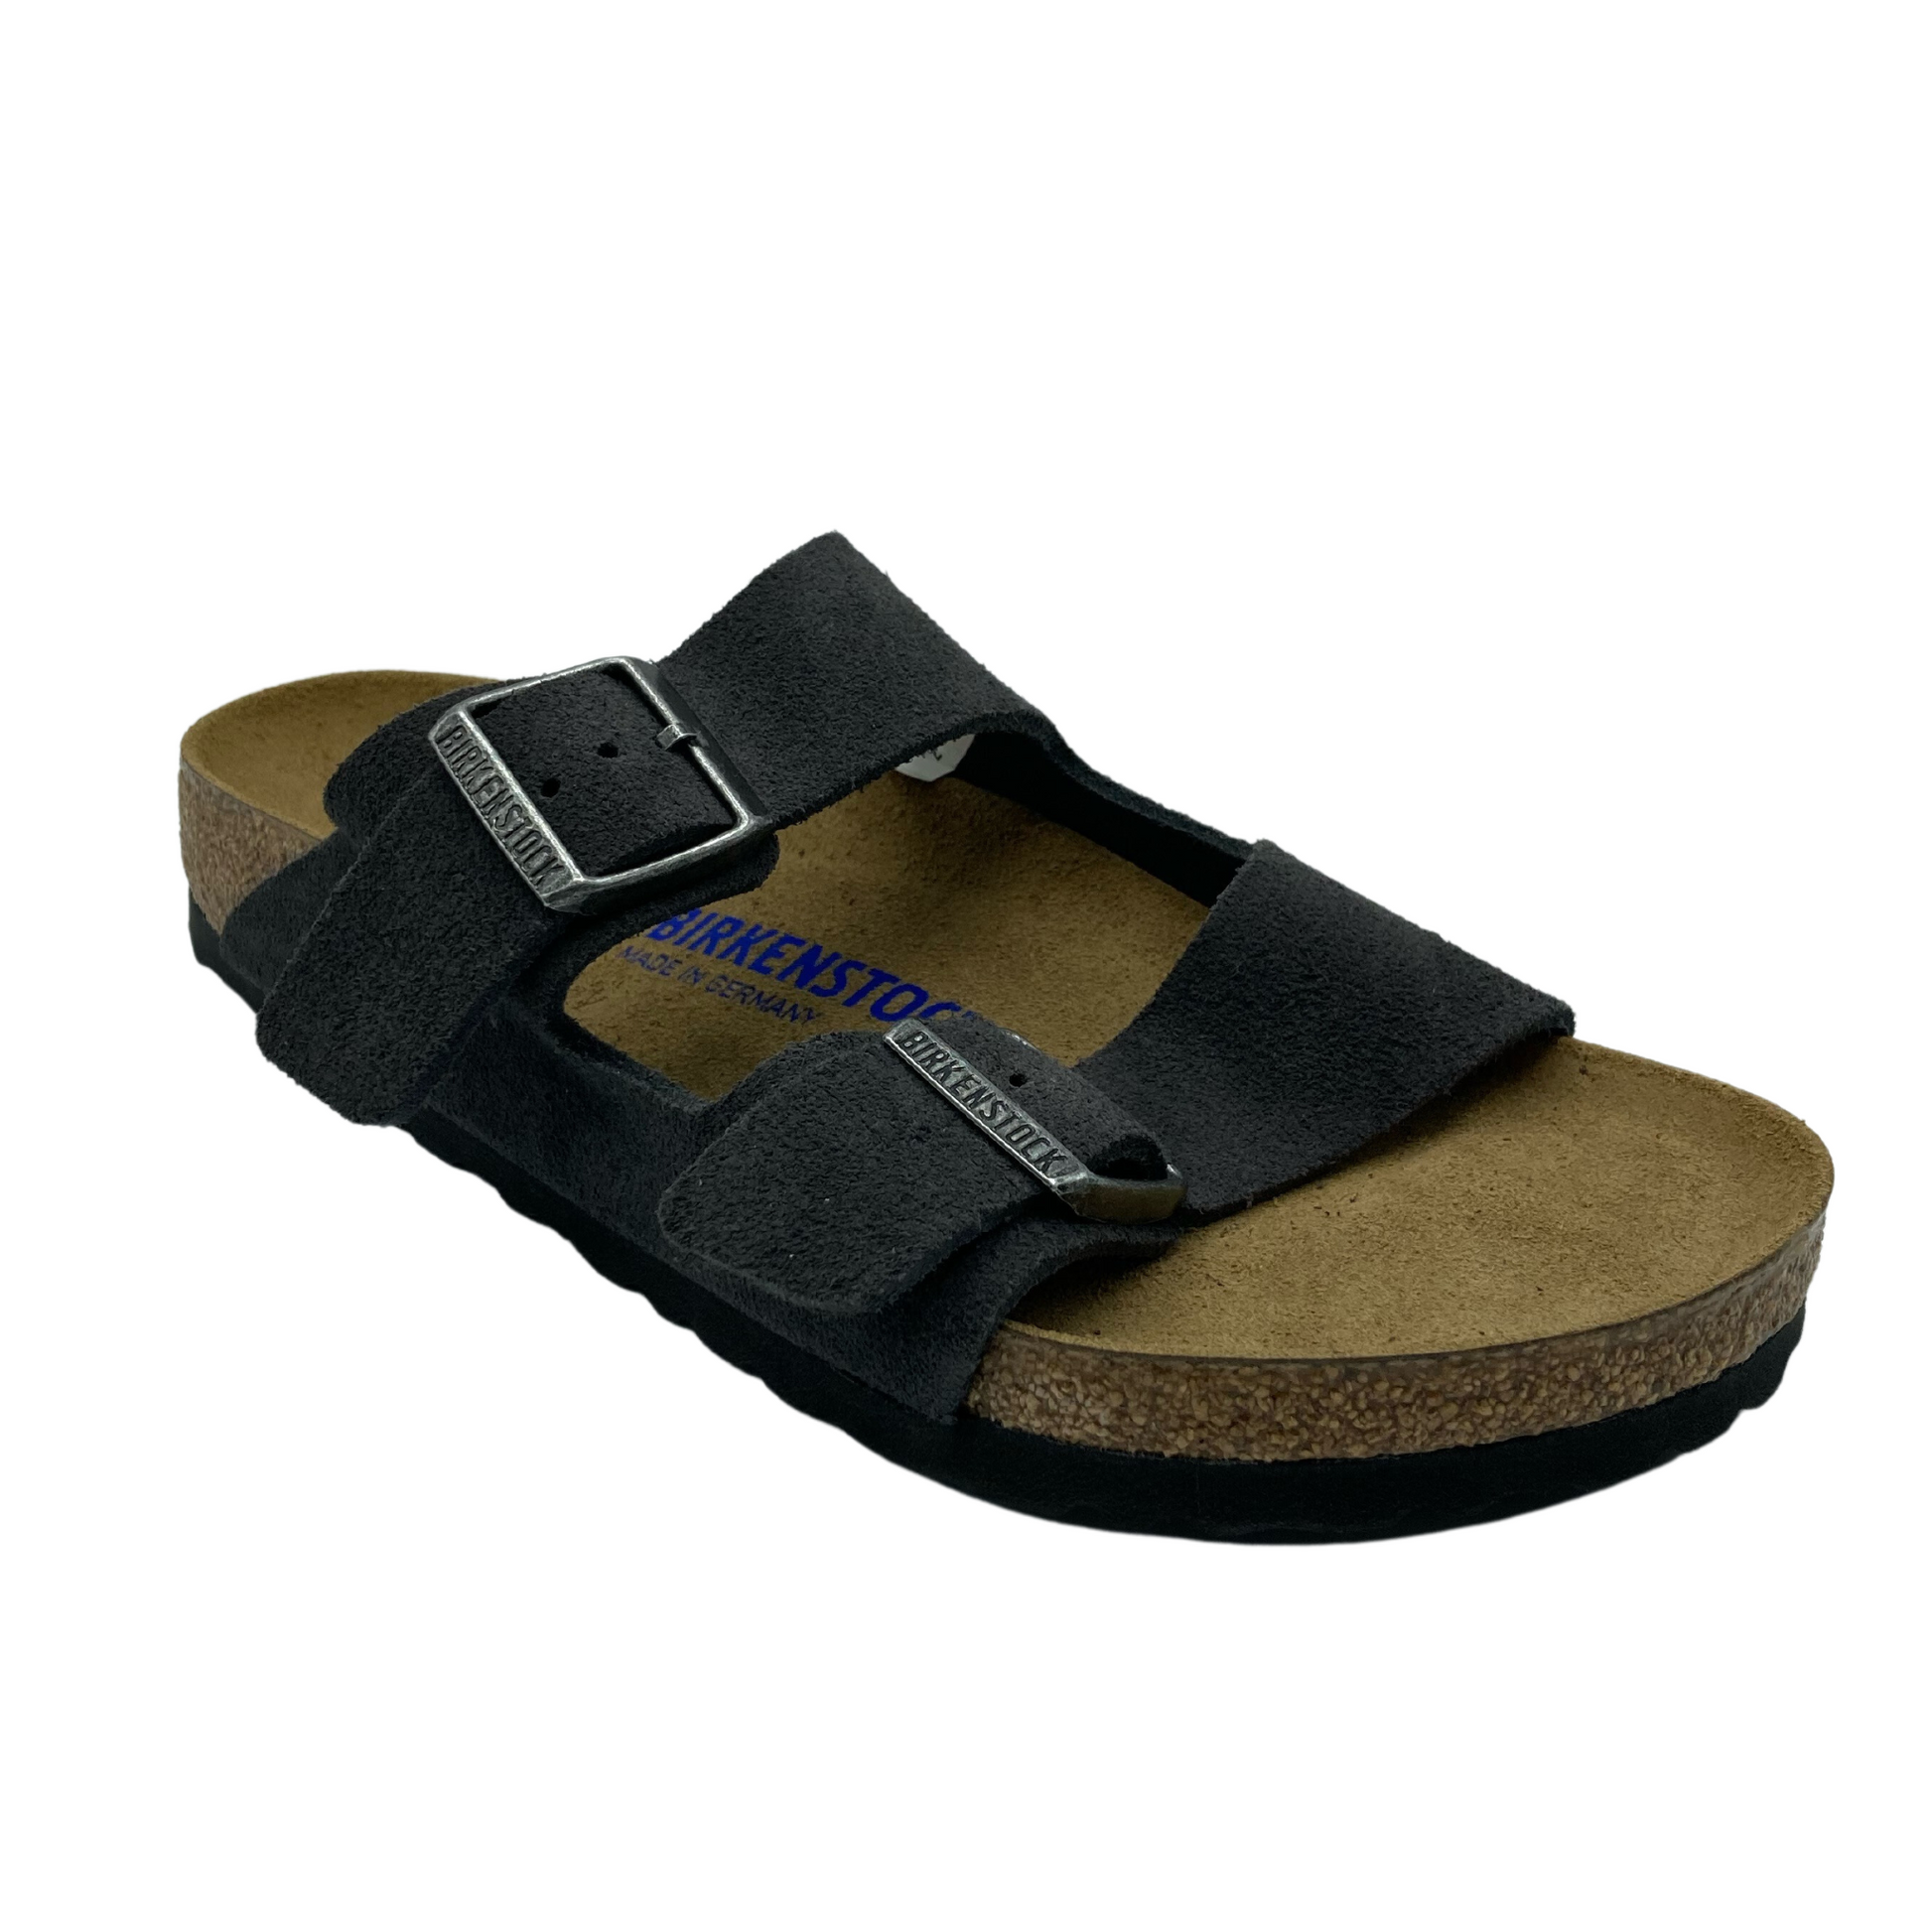 45 degree angled view of contoured footbed sandal with grey straps and silver buckles